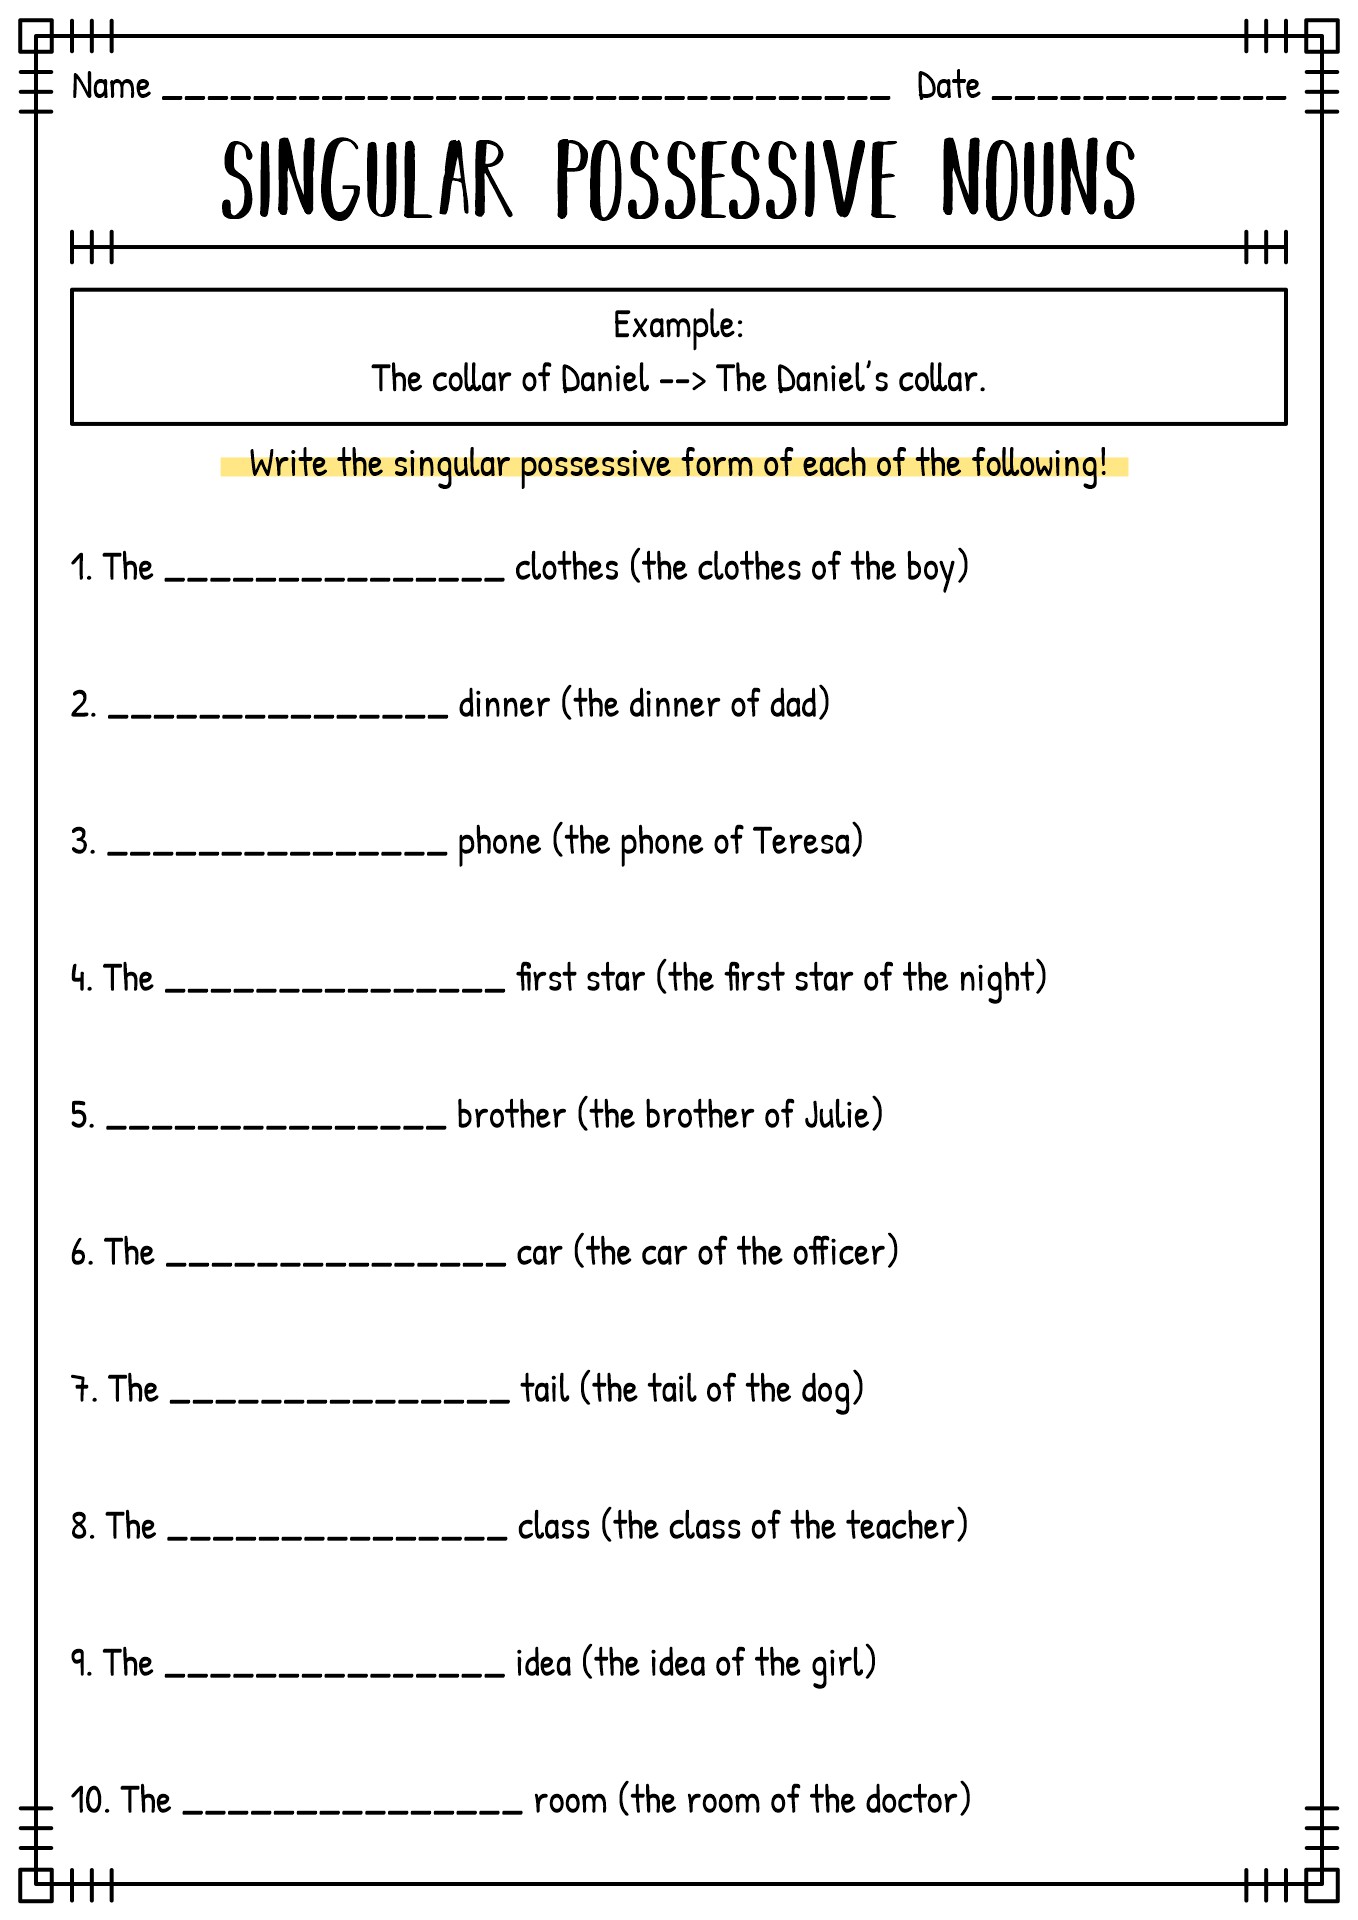 plurals-and-possessives-worksheets